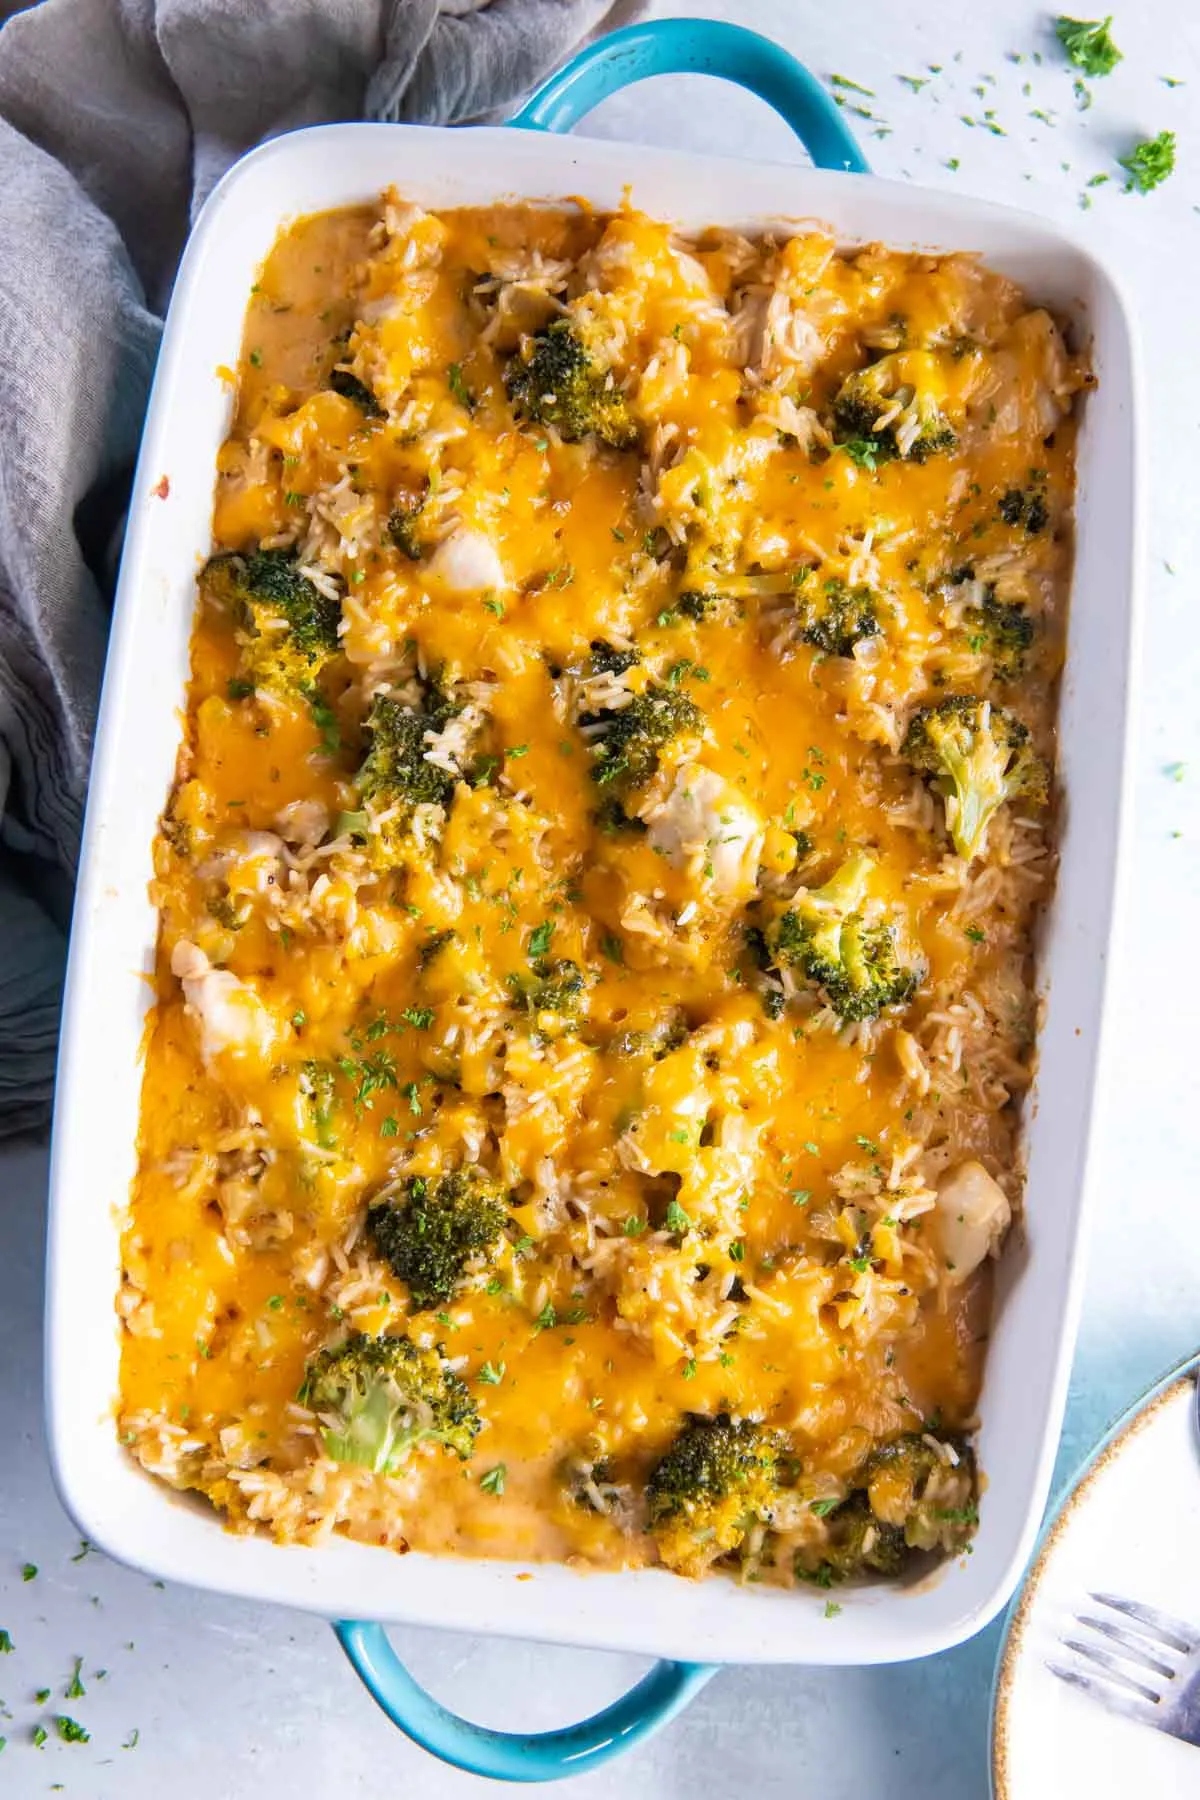 Knorr Chicken and Rice Bake Recipe